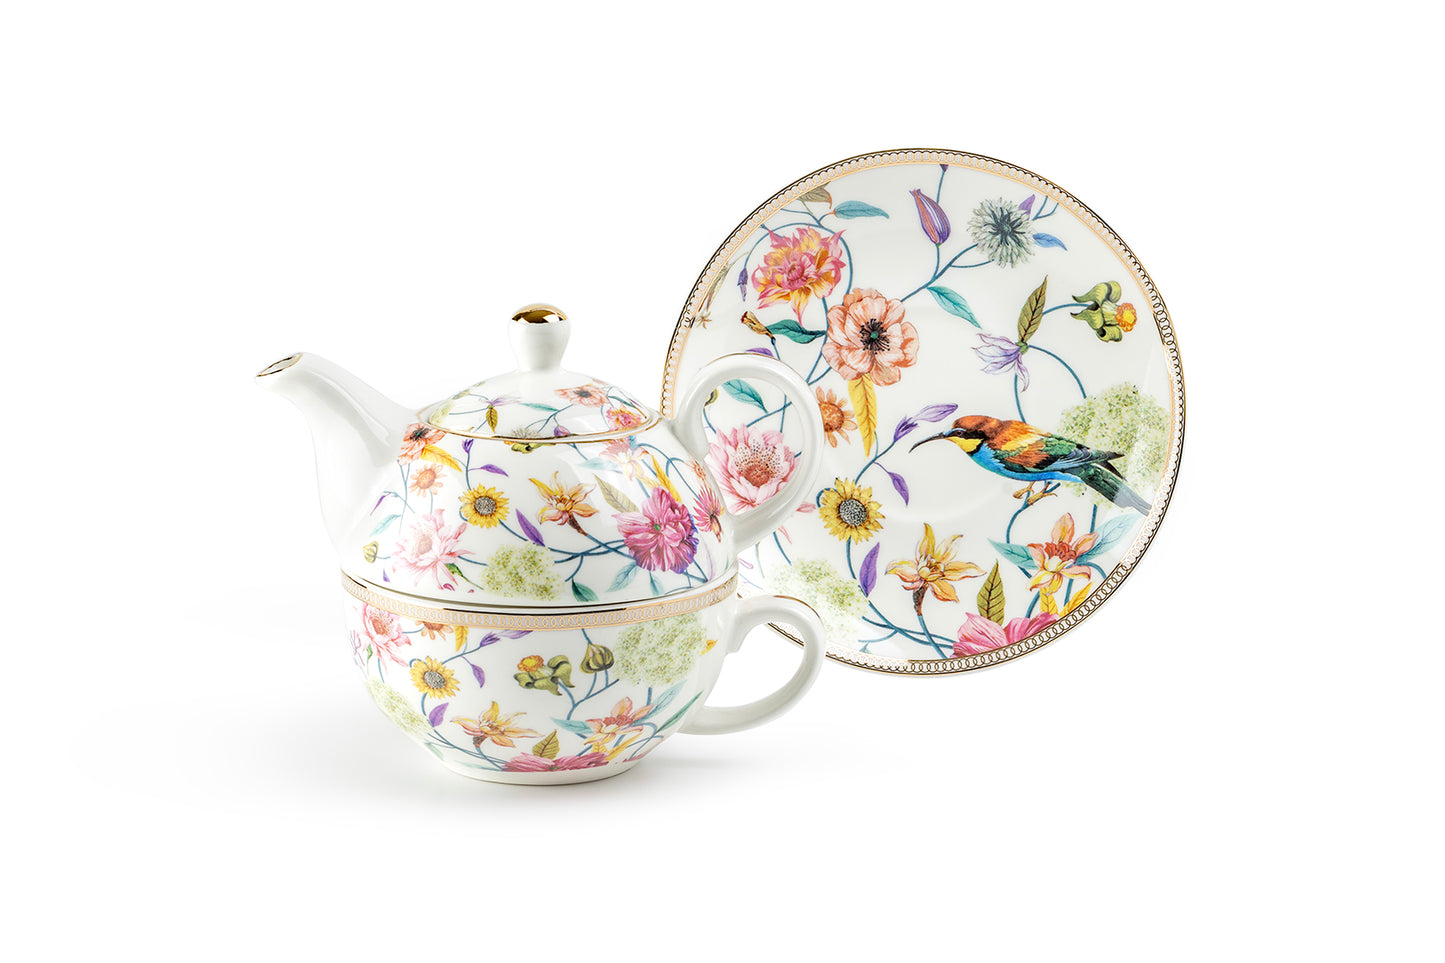 Spring Flowers with Hummingbird Fine Porcelain Tea For One Set